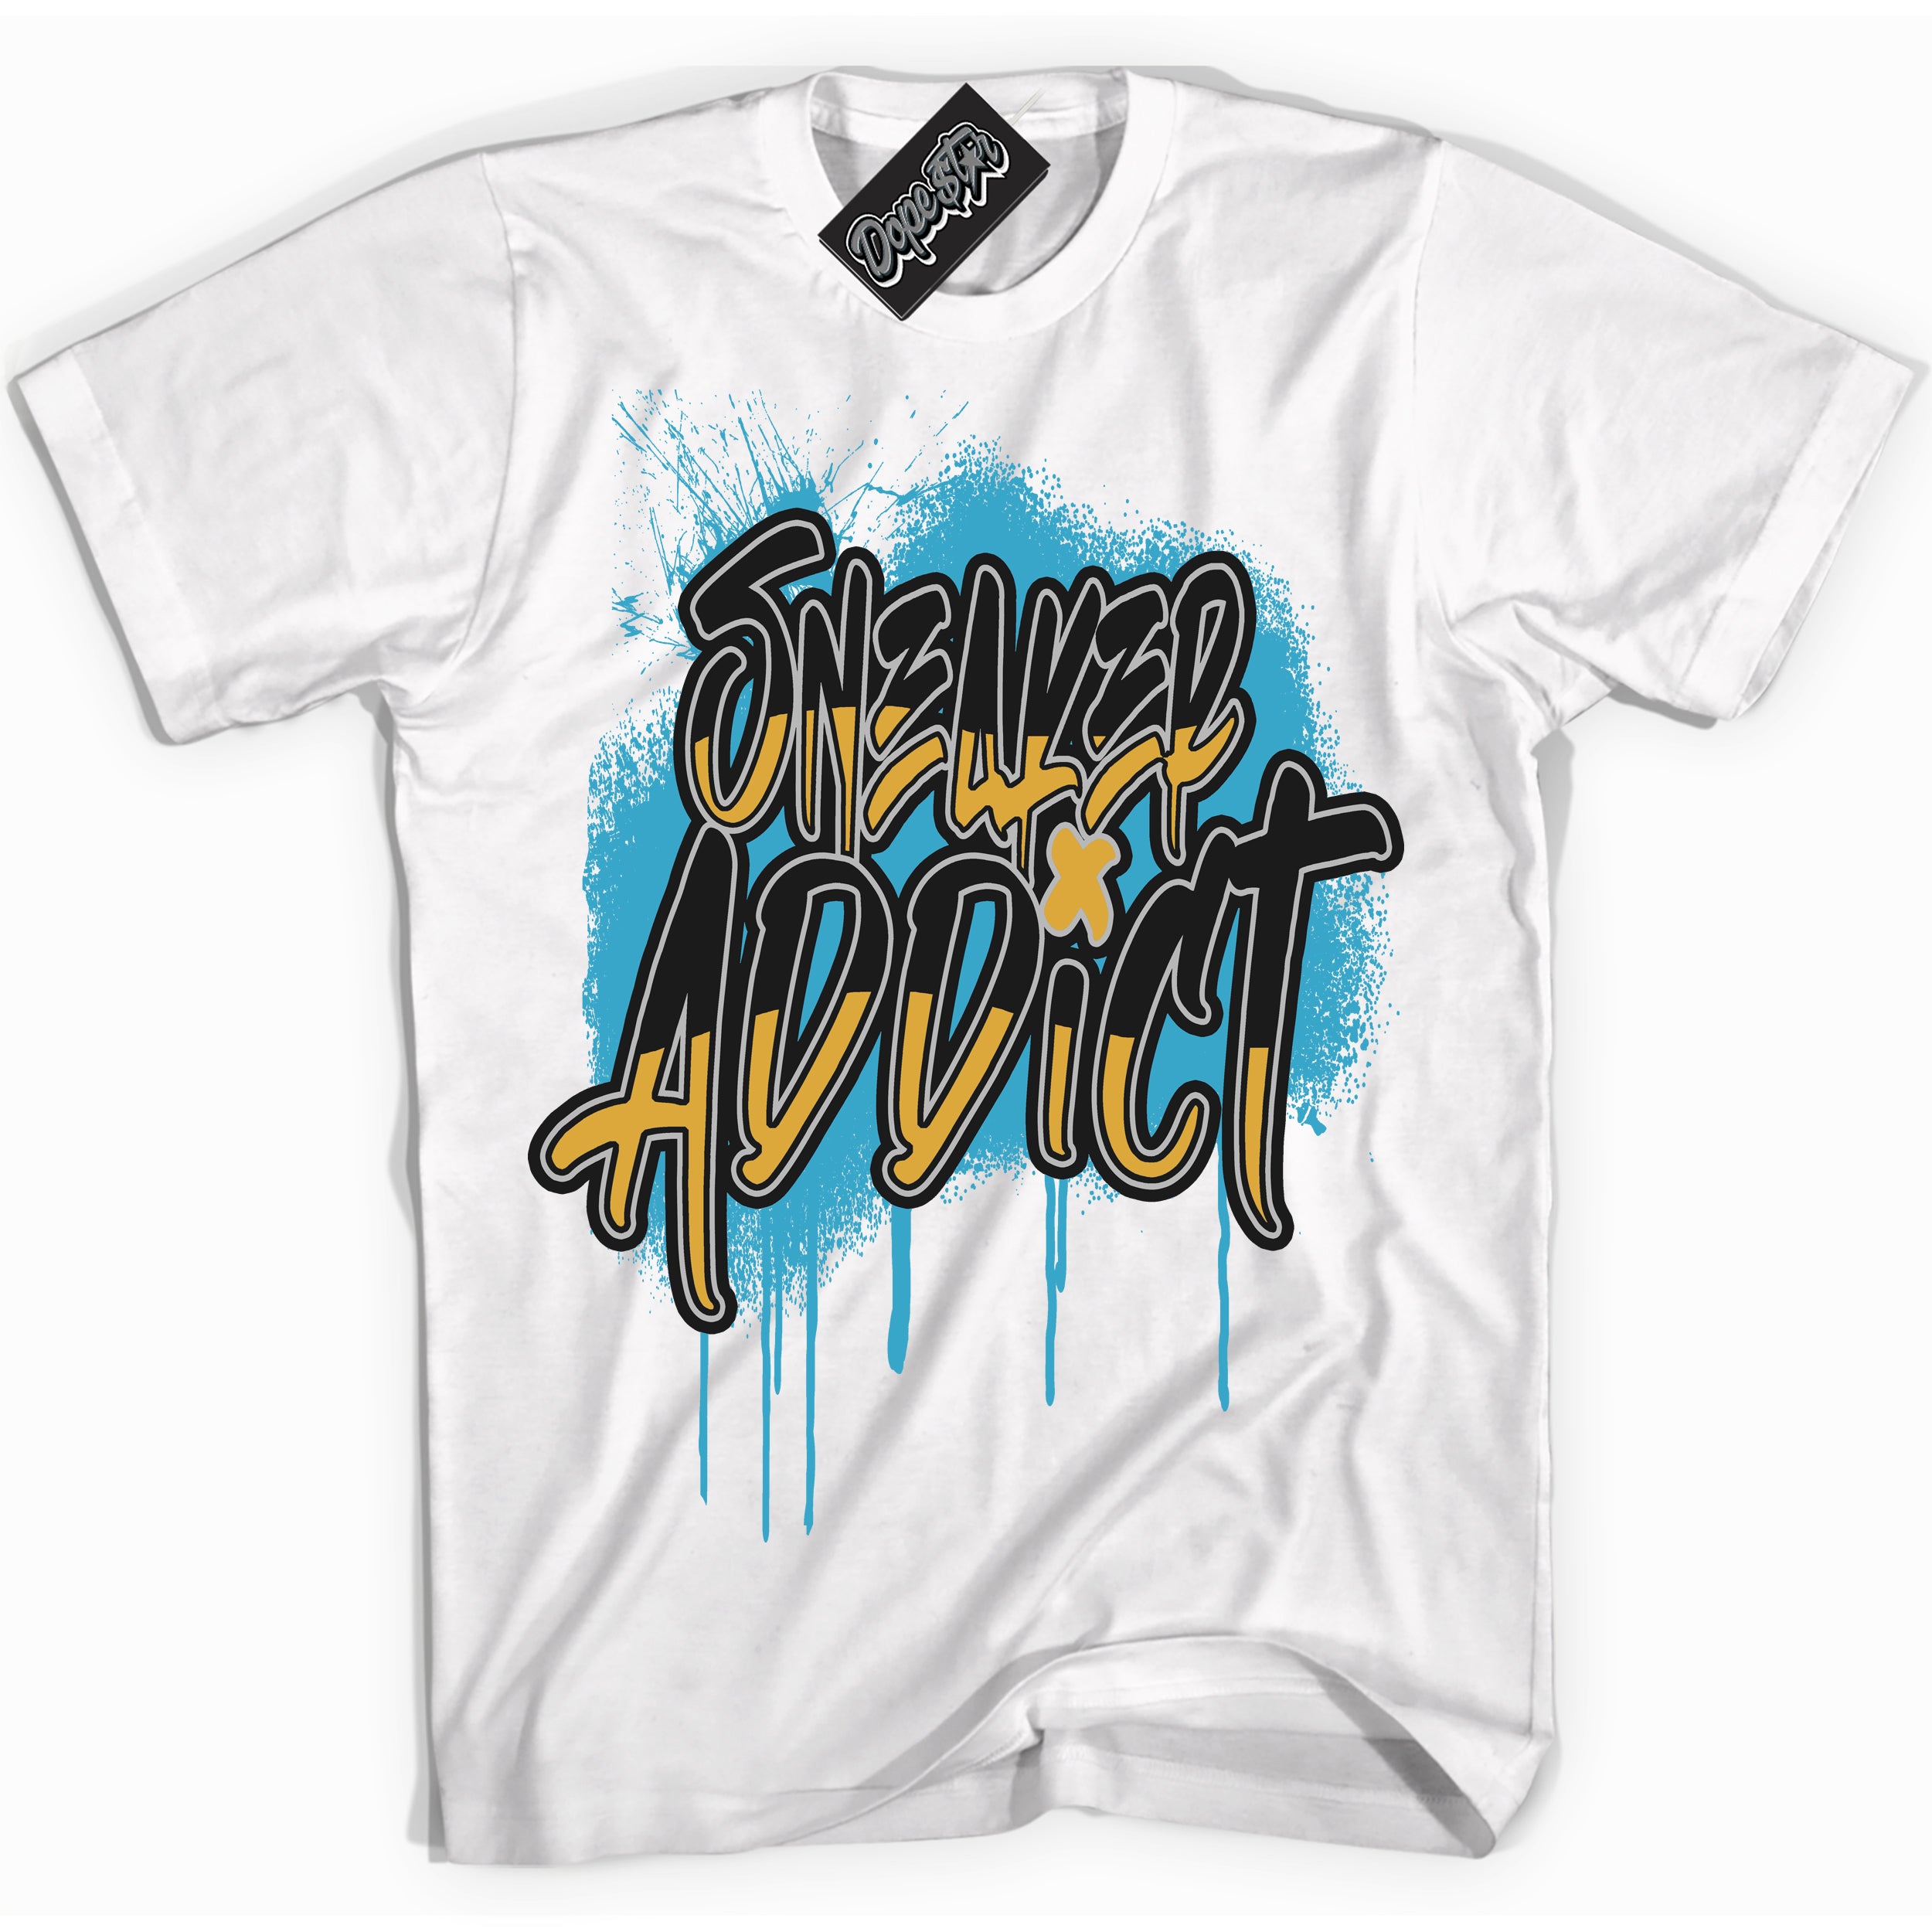 Cool White graphic tee with “ Sneaker Addict ” print, that perfectly matches AQUA 5s sneakers